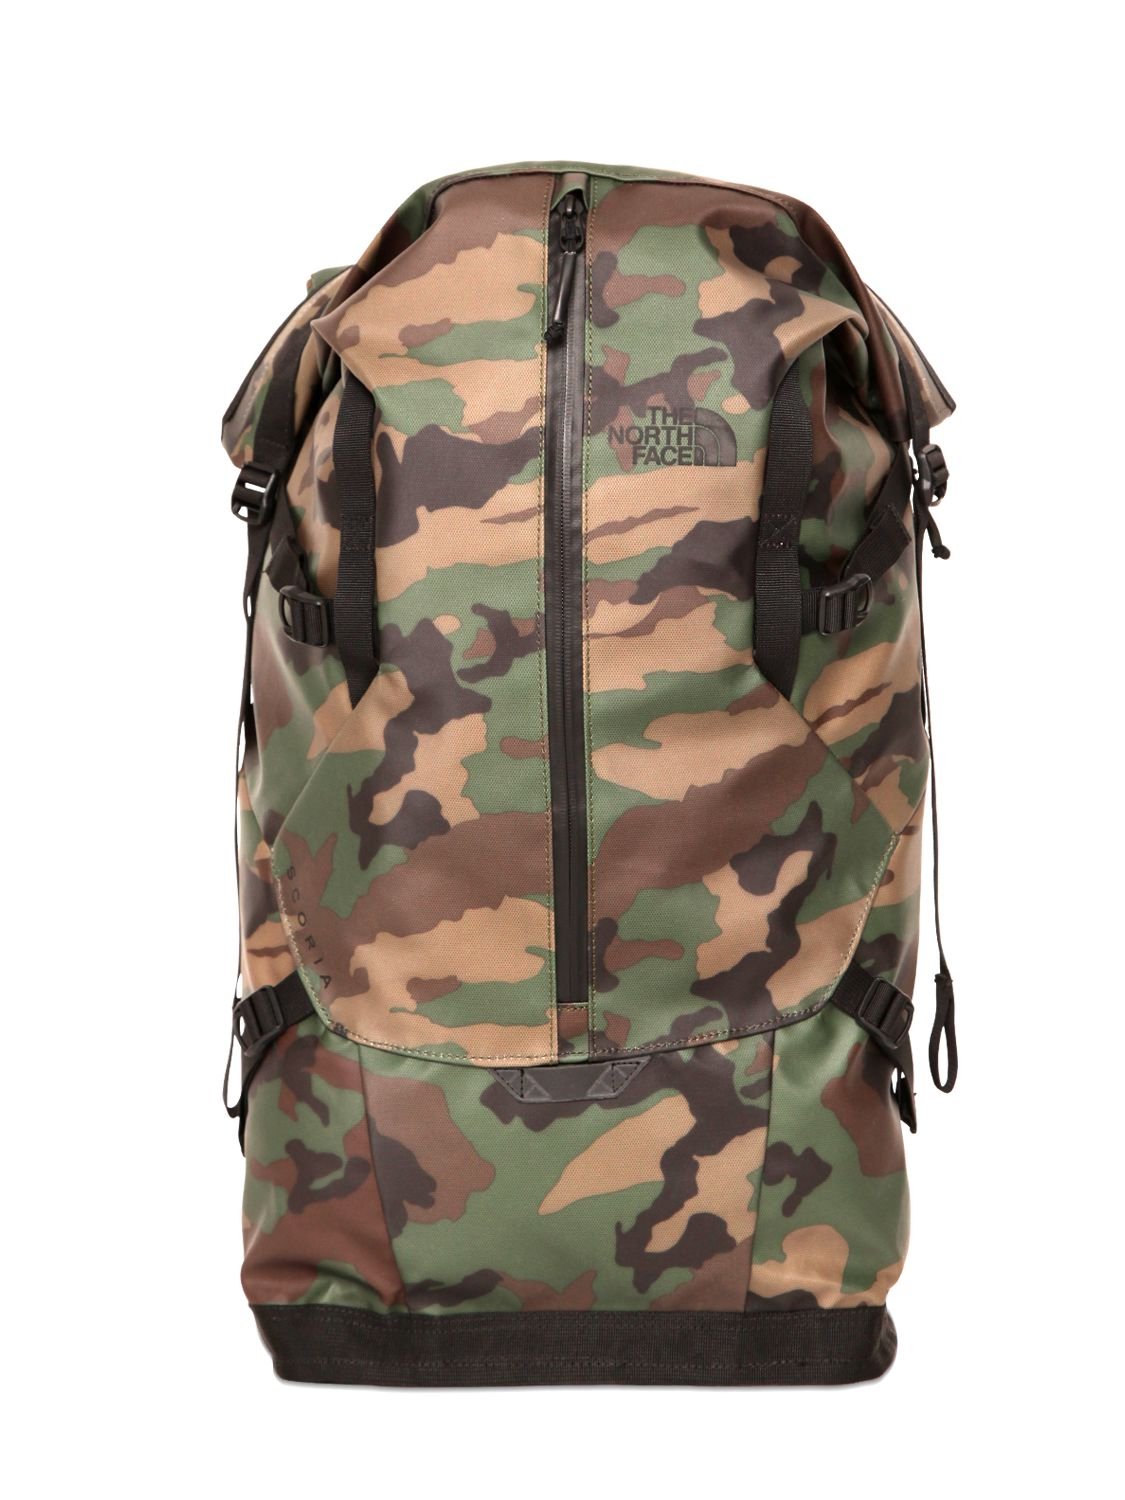 north face army backpack